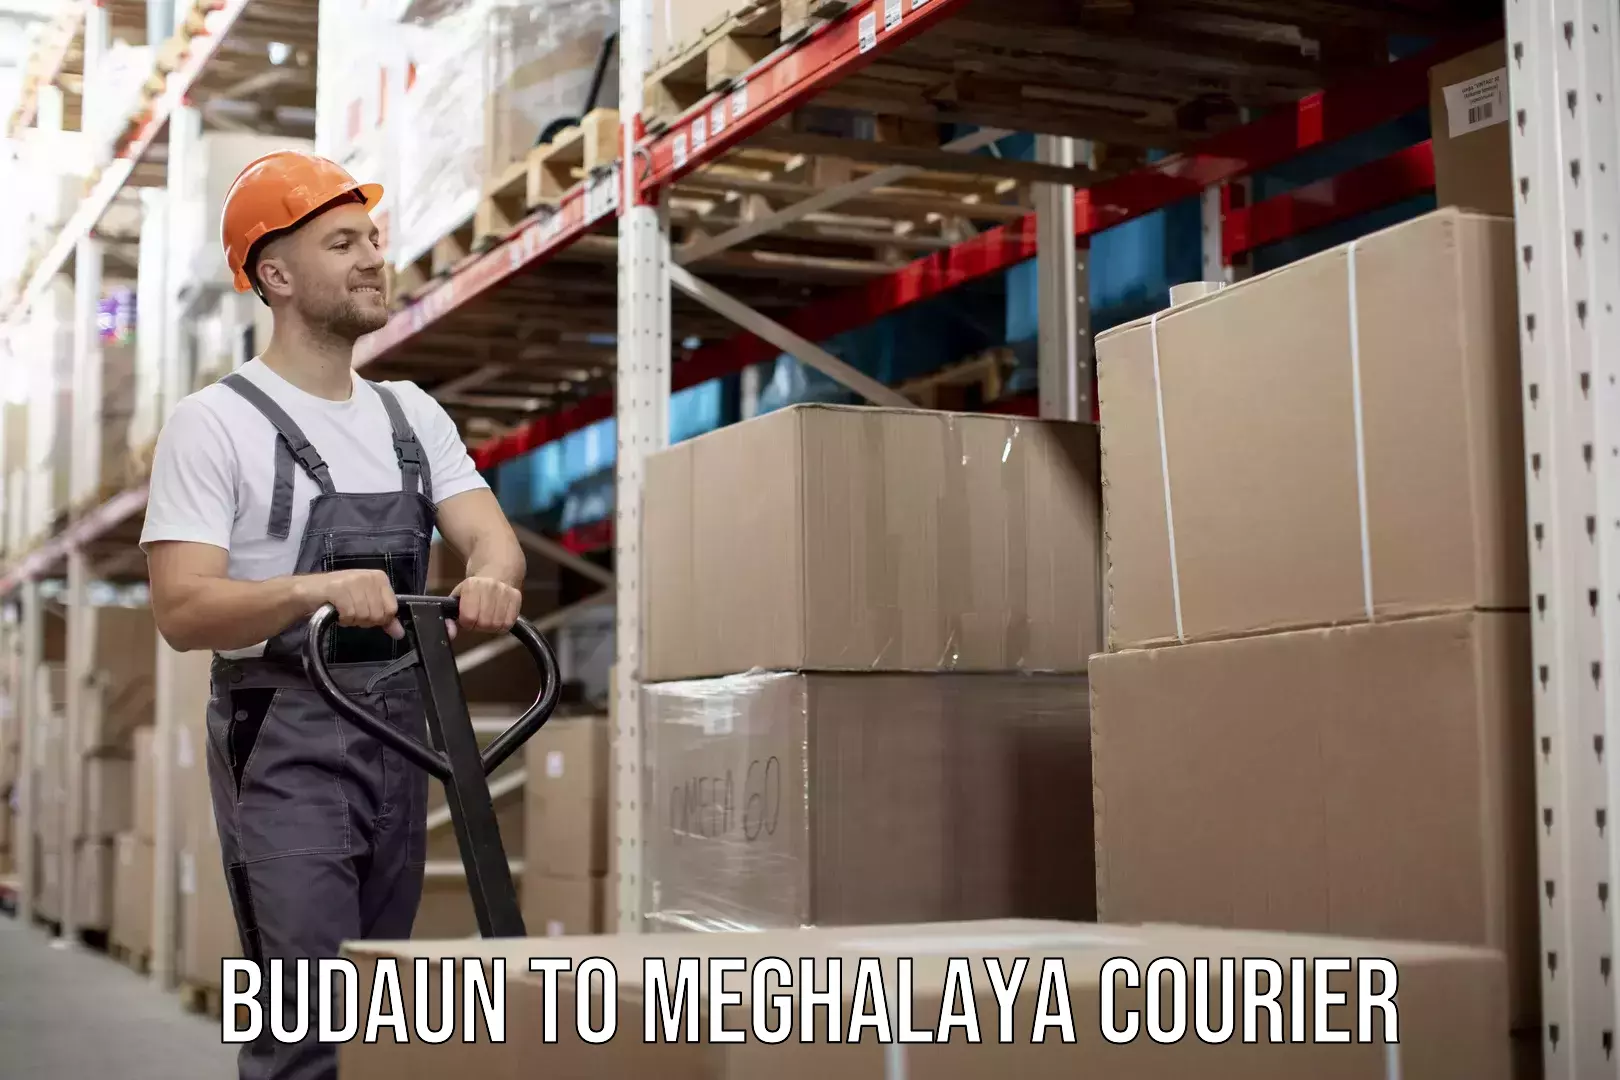 Customer-oriented courier services Budaun to Meghalaya